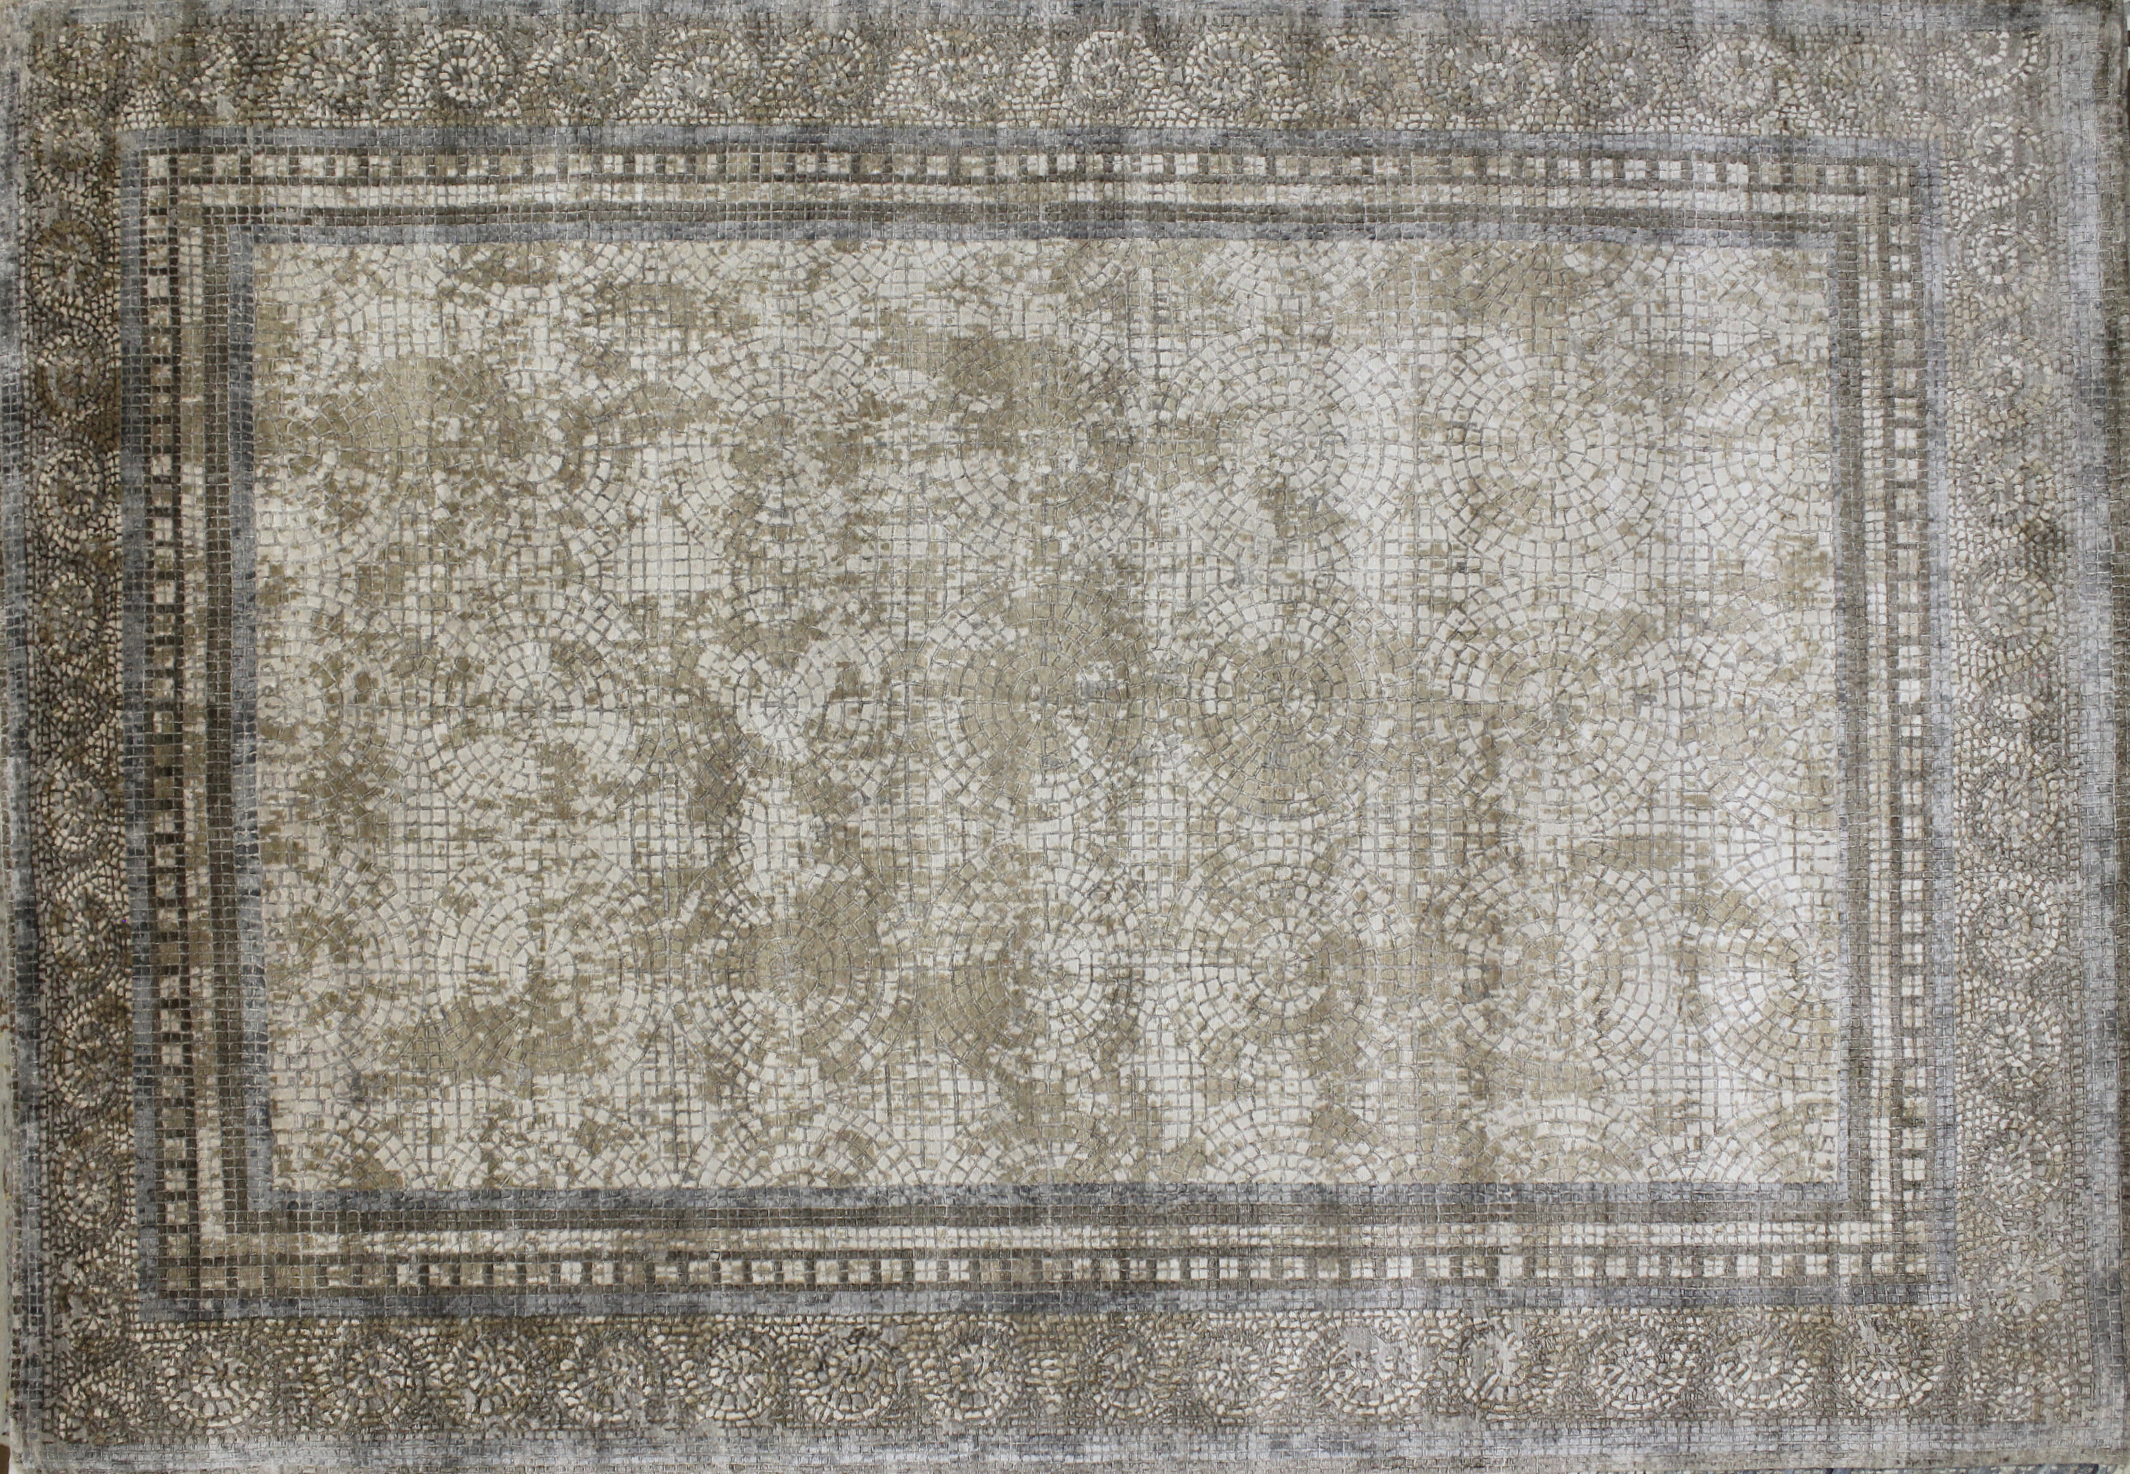 Contemporary & Modern Rugs Mosaic 022658 Ivory - Beige & Lt. Grey - Grey Hand Knotted Rug